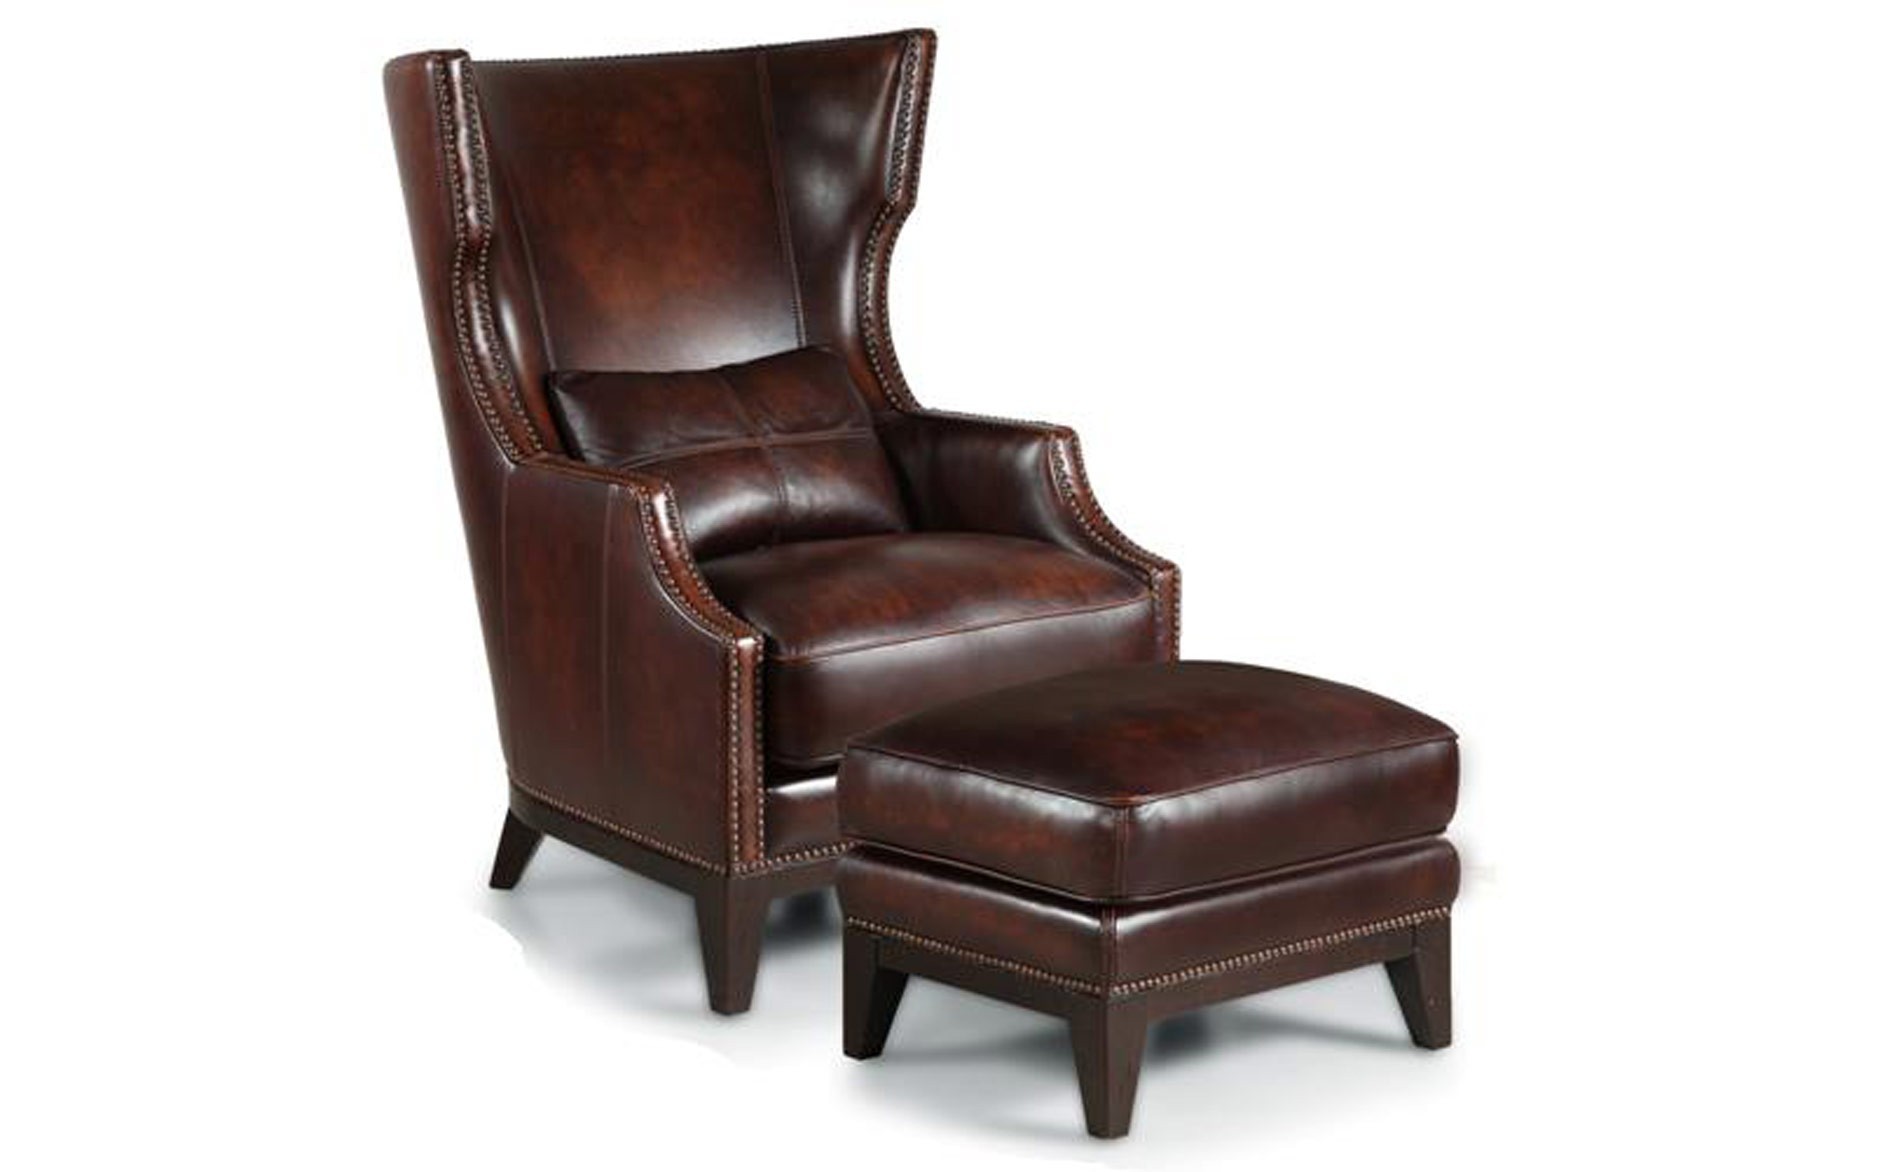 brown leather chair and ottoman